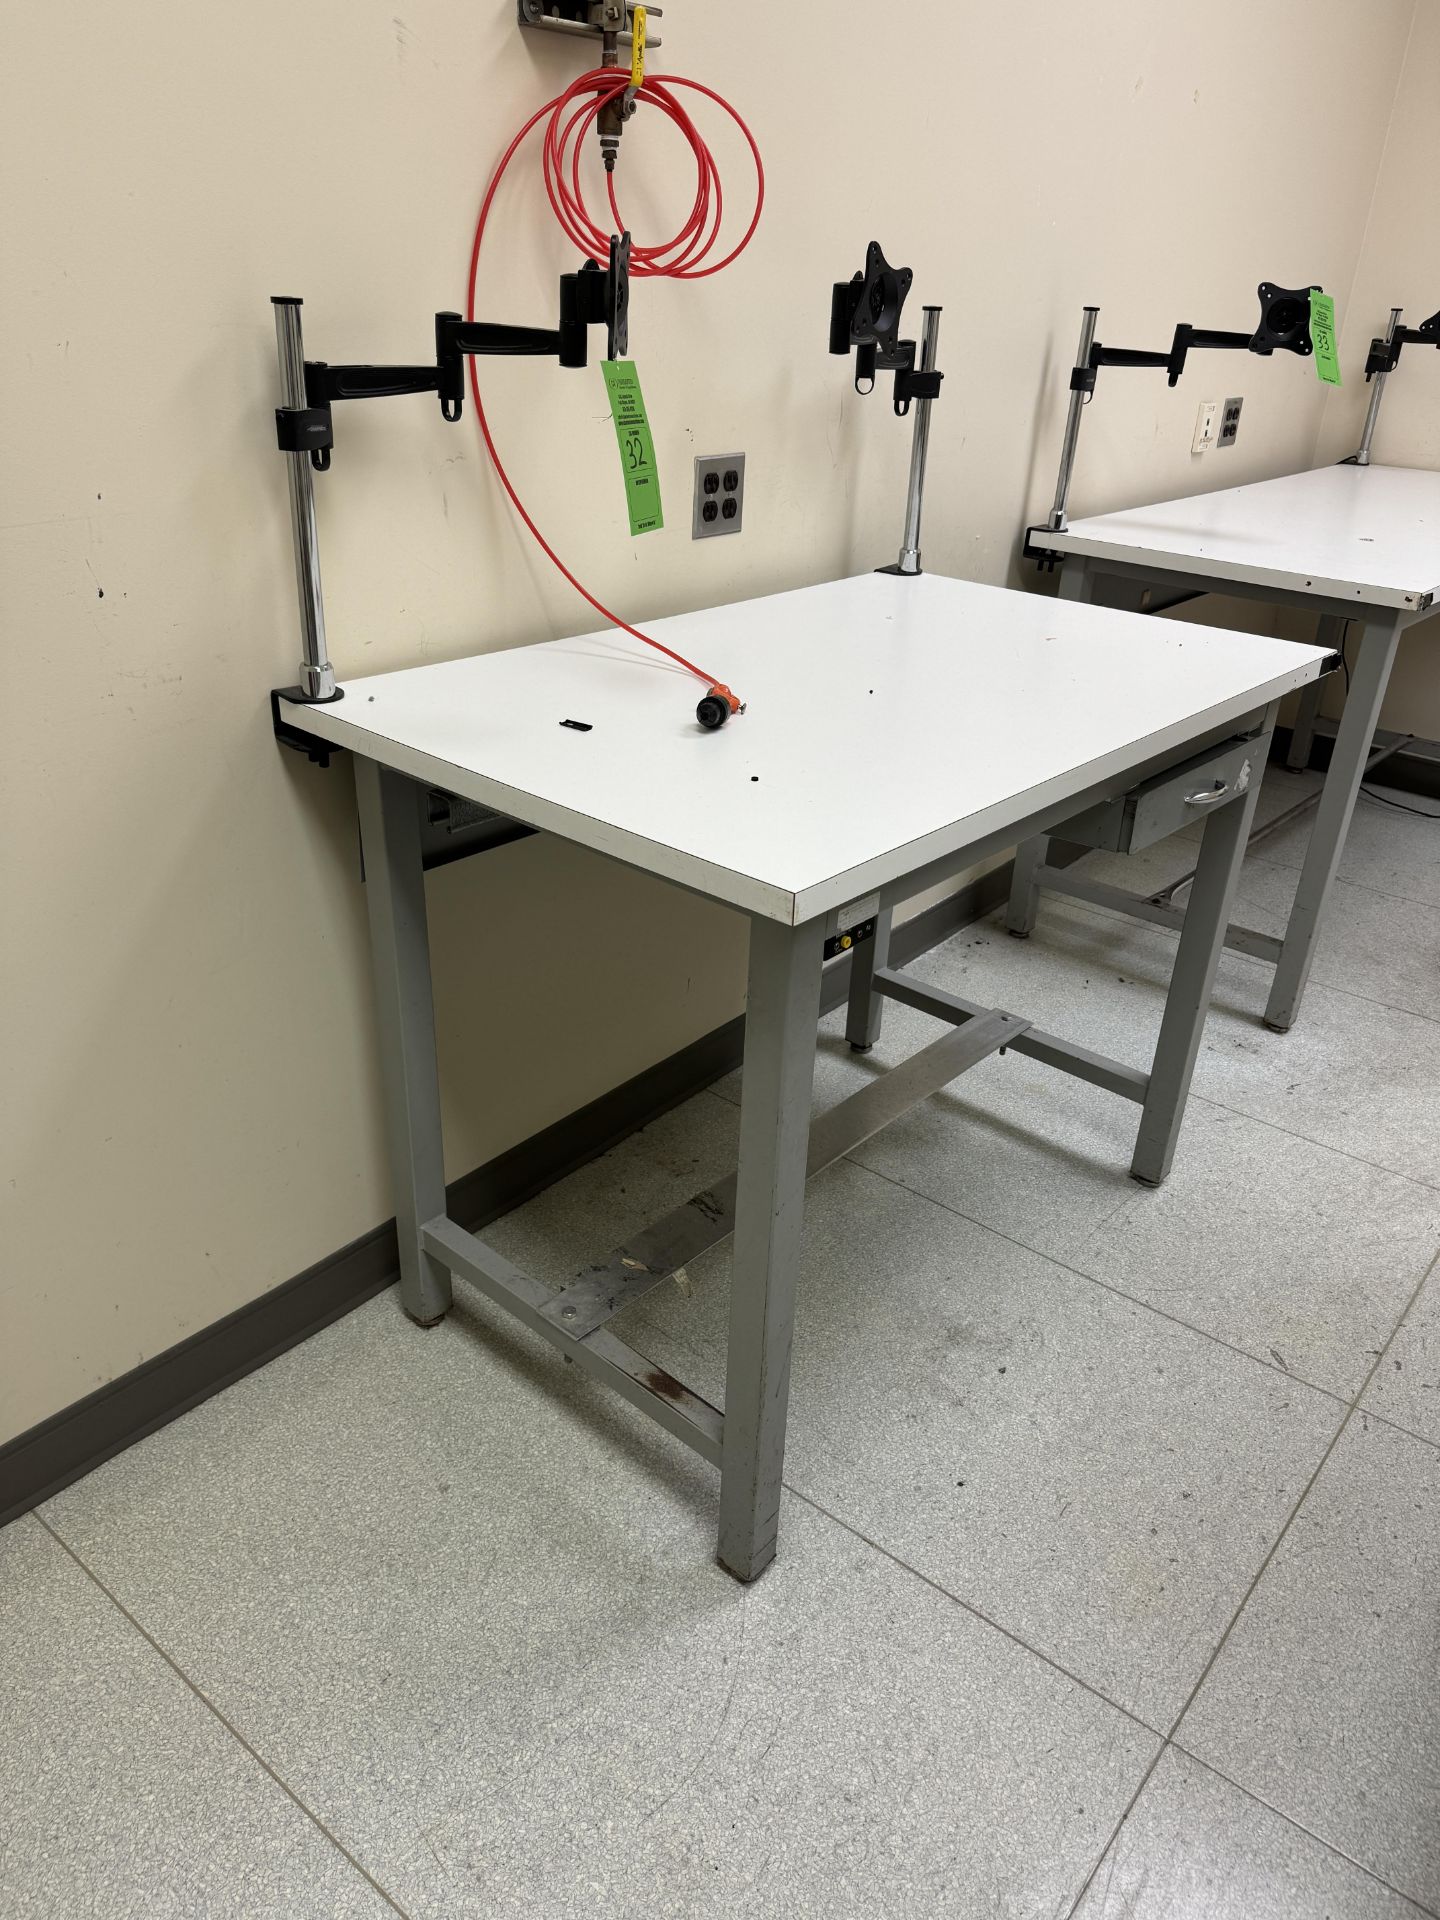 TABLE WITH (2) MONITOR MOUNTS (ZONE 3)